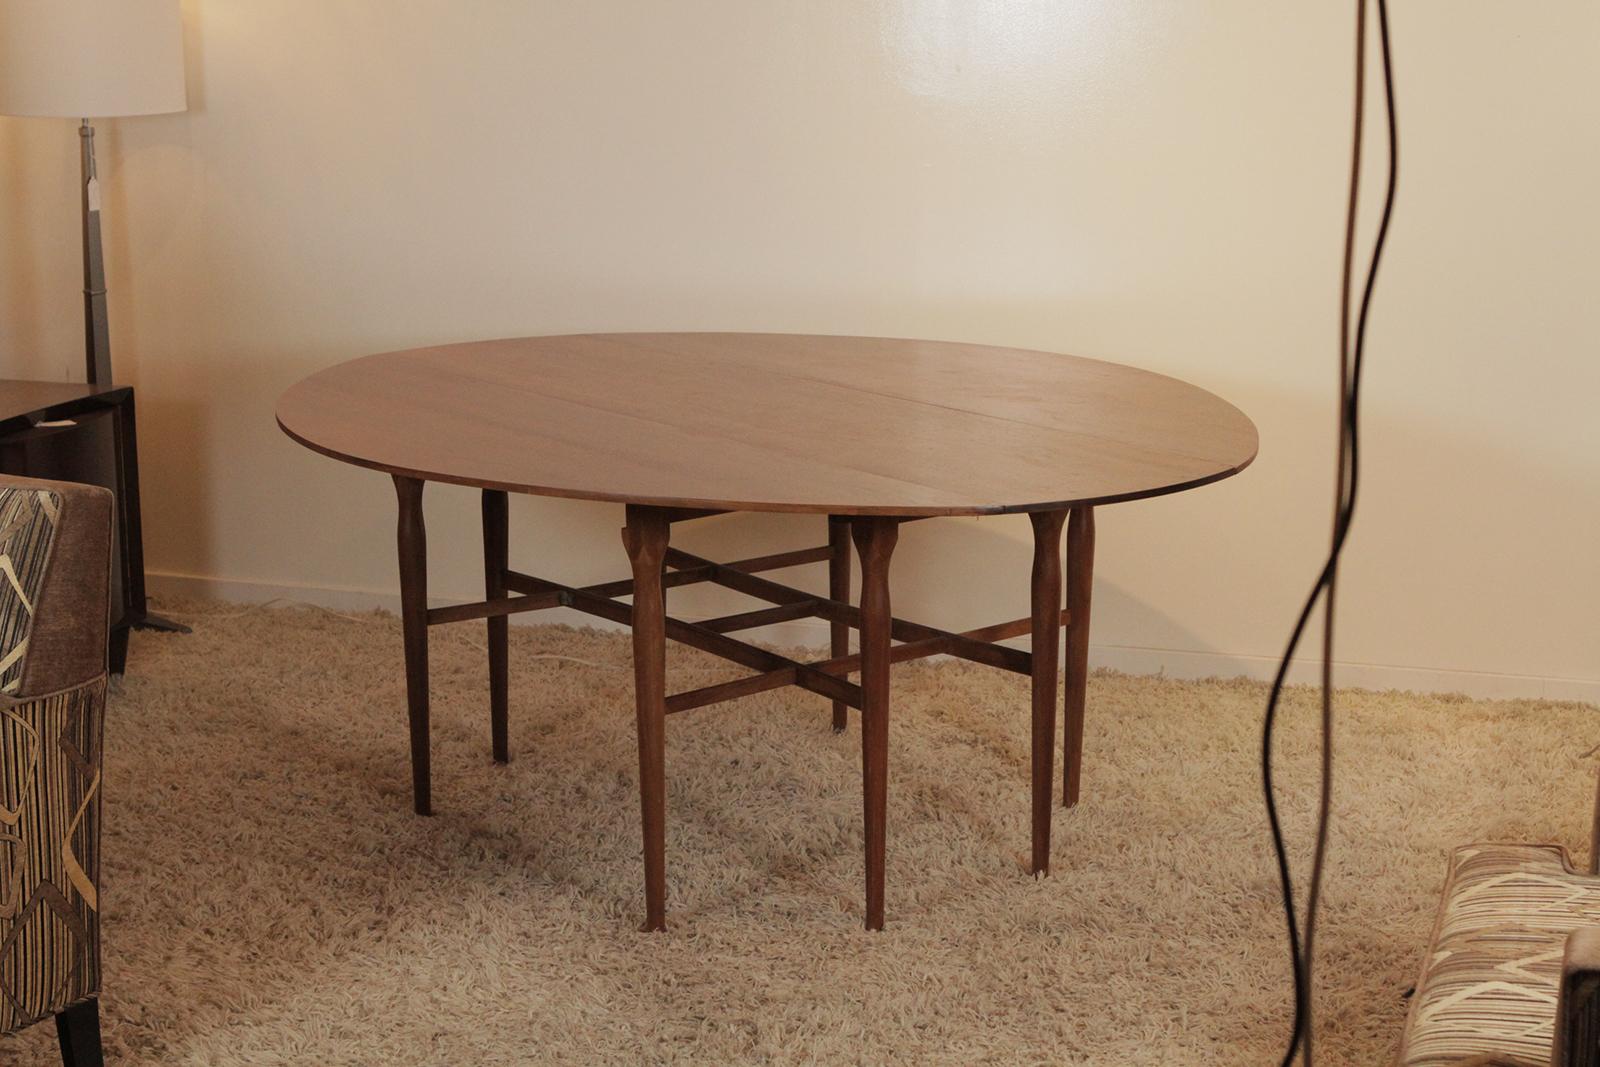 A classic sleek walnut drop-leaf table with two drop leaves. Measures: The table with leaves down, 72 long, 19.5 deep leaves up 72 by 60. 29 inches tall.